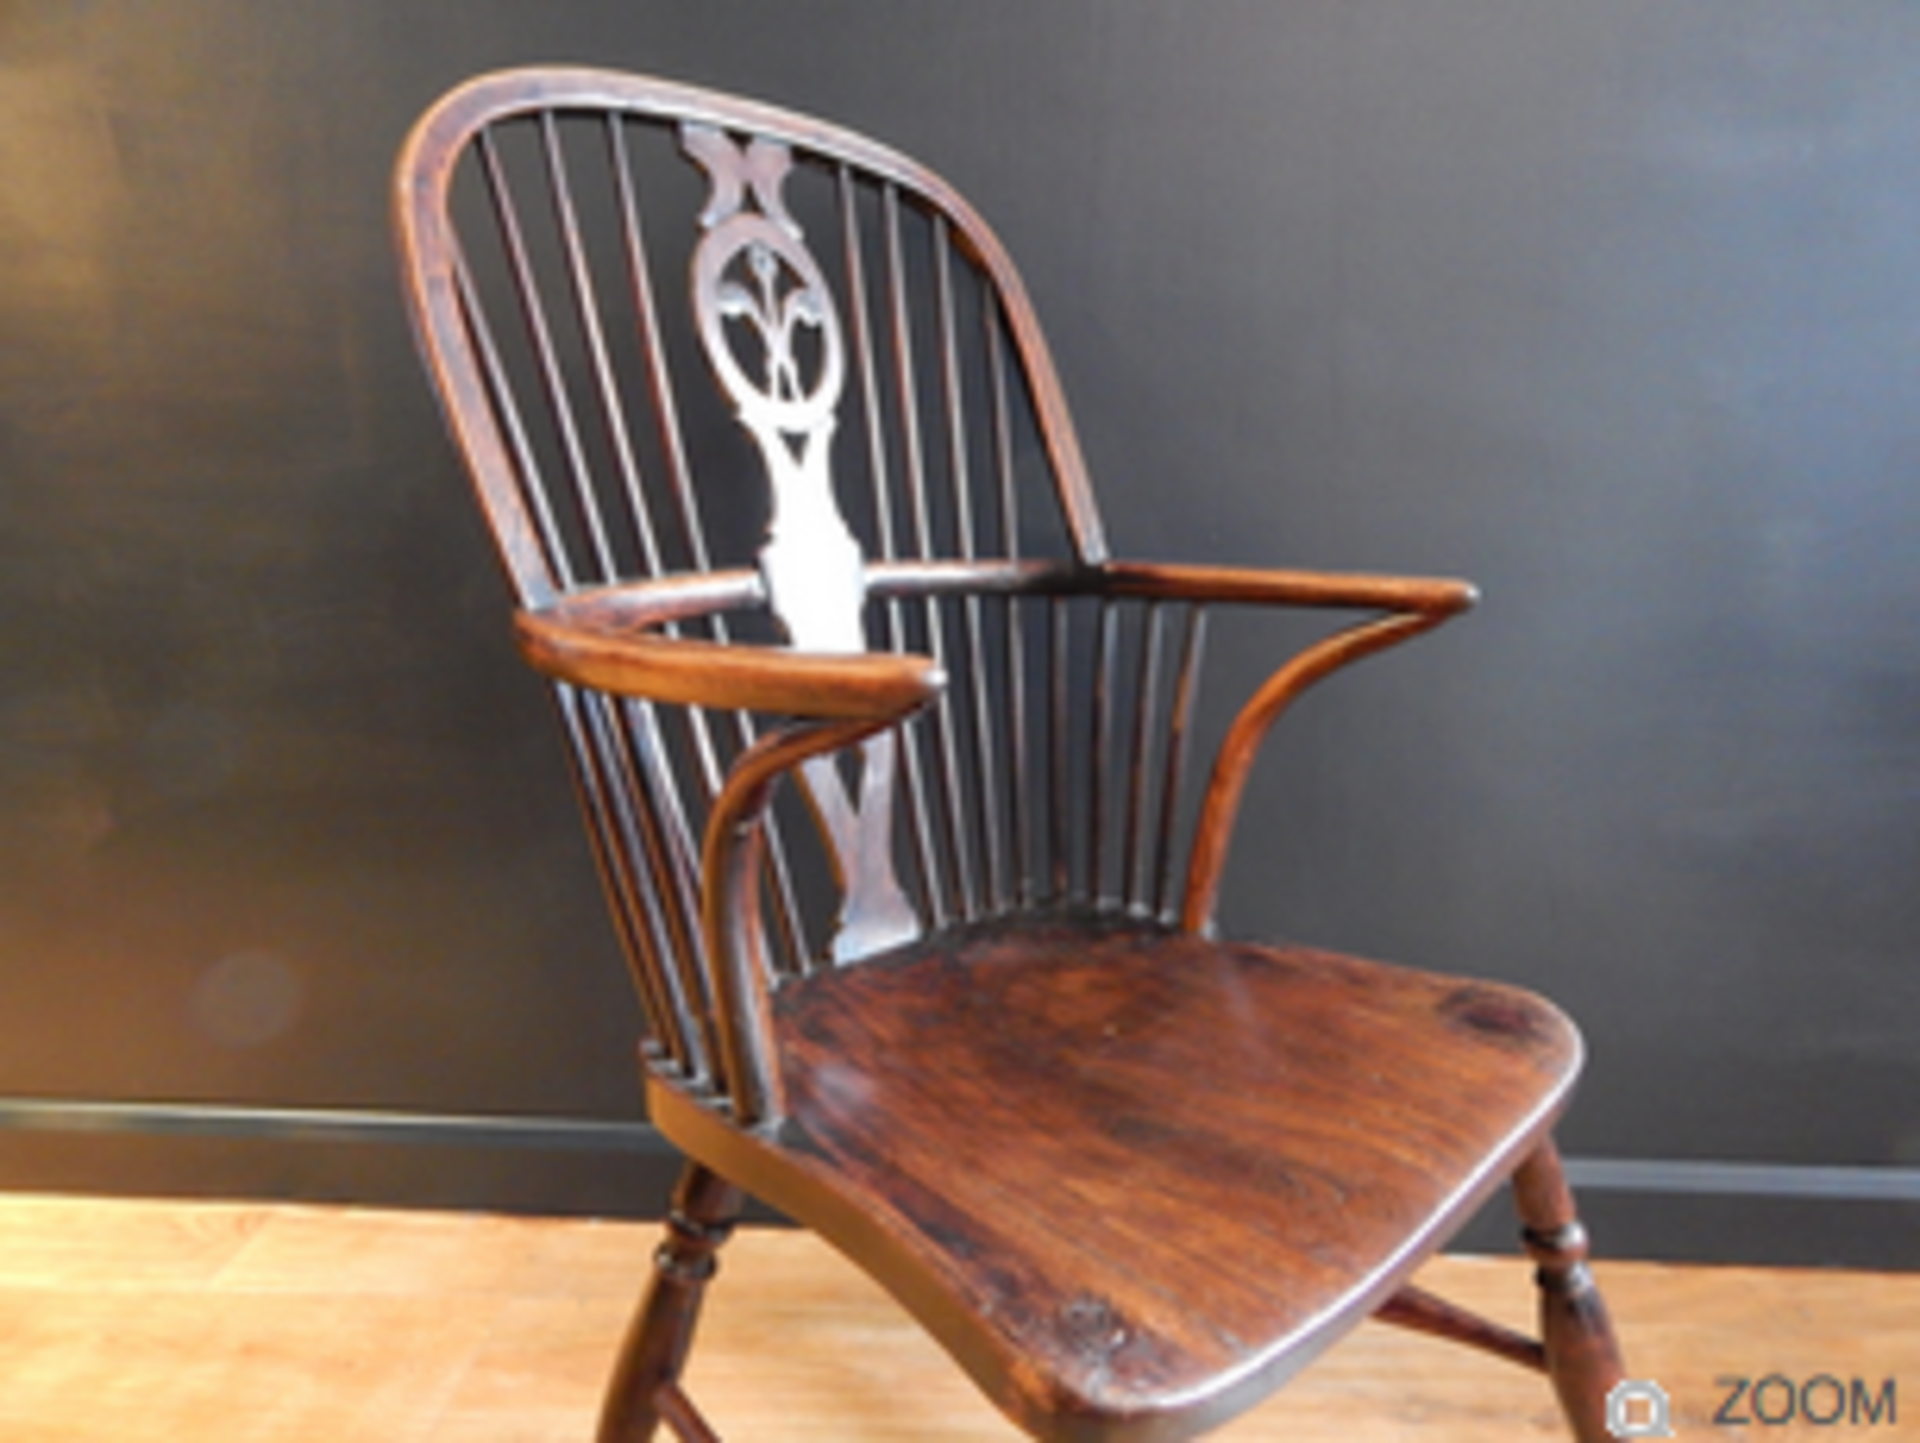 Early 19th Century Windsor Chair – Fruitwood with Prince of Wales Feathers splat - Image 3 of 6